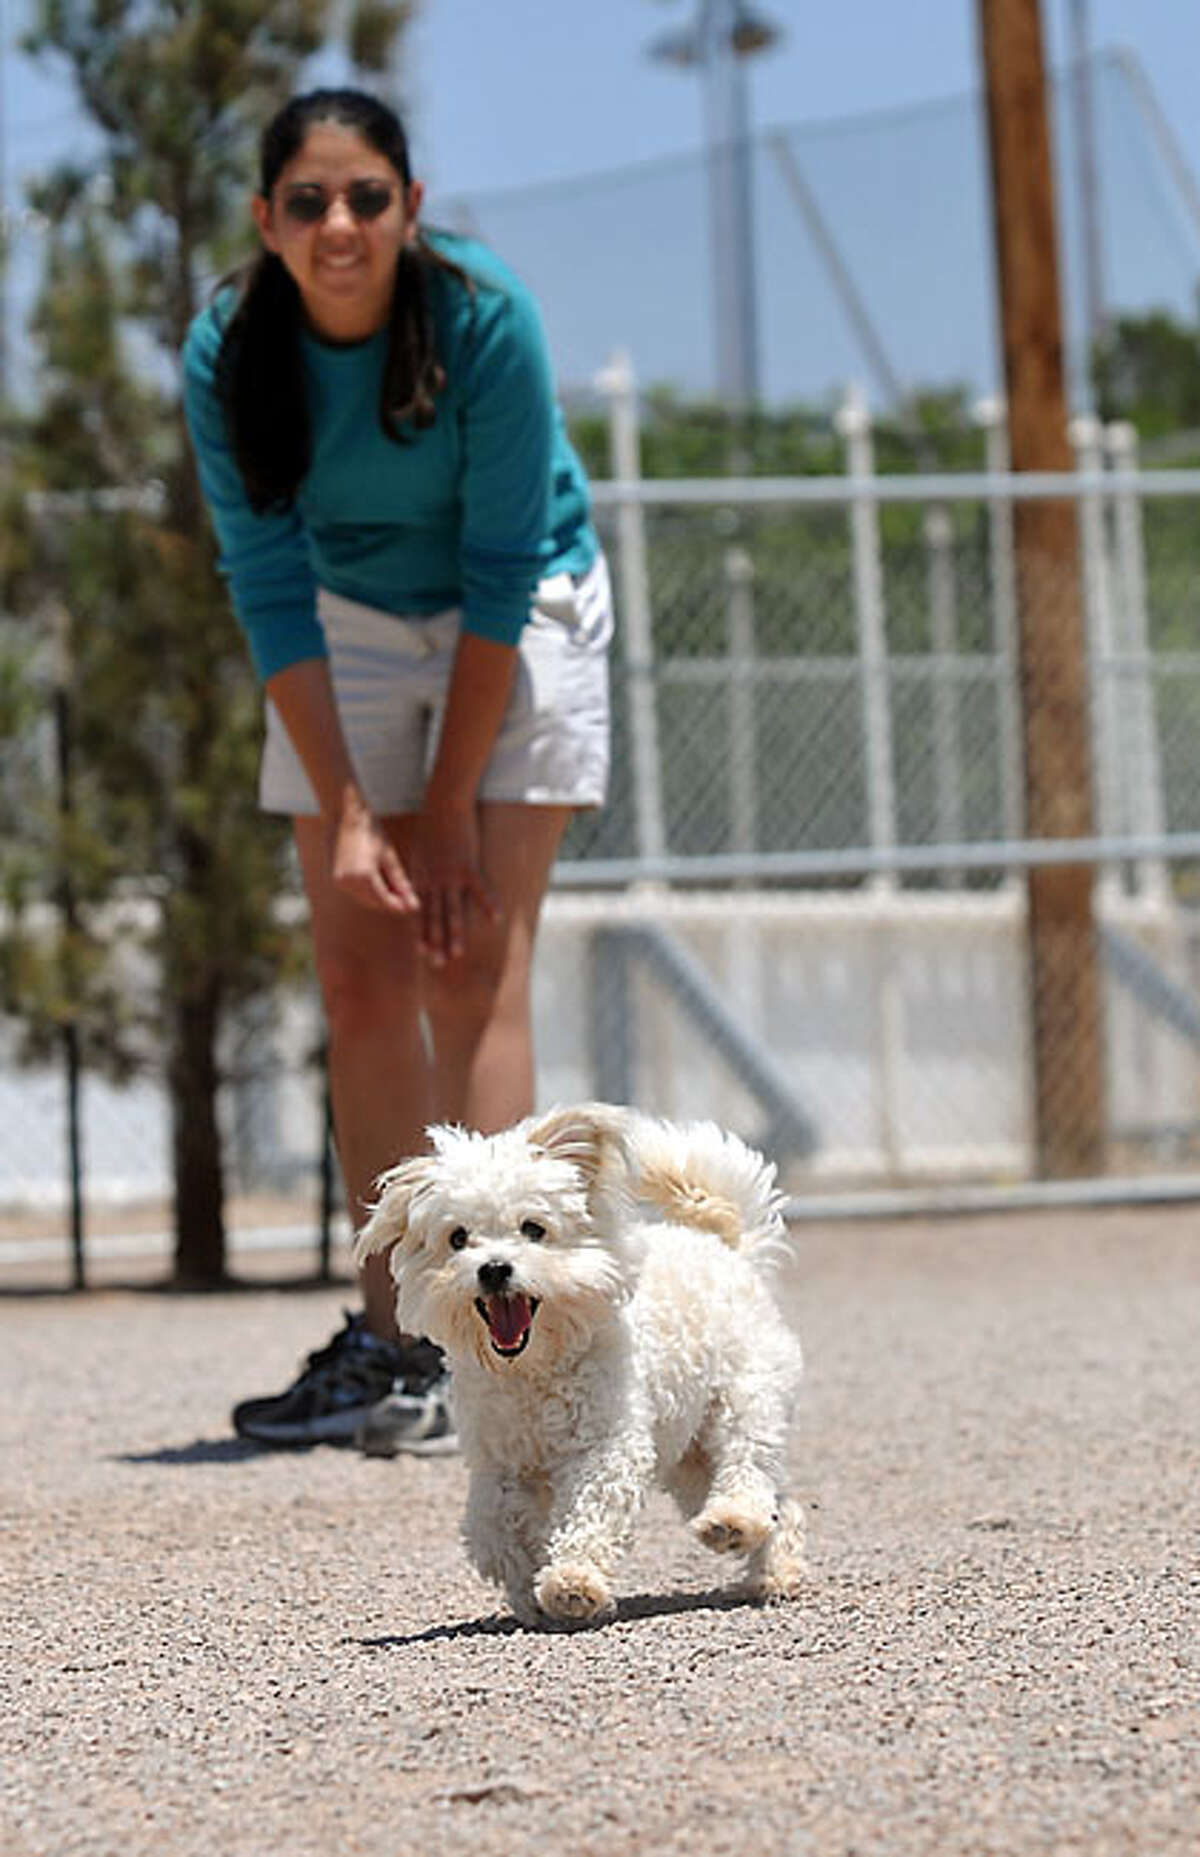 Snicker Doodle runs free of a leash Monday, May 17, 2010, at the Las Cruces Dog Park in Las Cruces, N.M., as Juliette Vigil plays fetch with the 1 1/2-year-old canine. The Las Cruces woman said she has been coming to the park with her dog regularly sincebecoming aware of it a little over one week ago. The park has been open for one year.